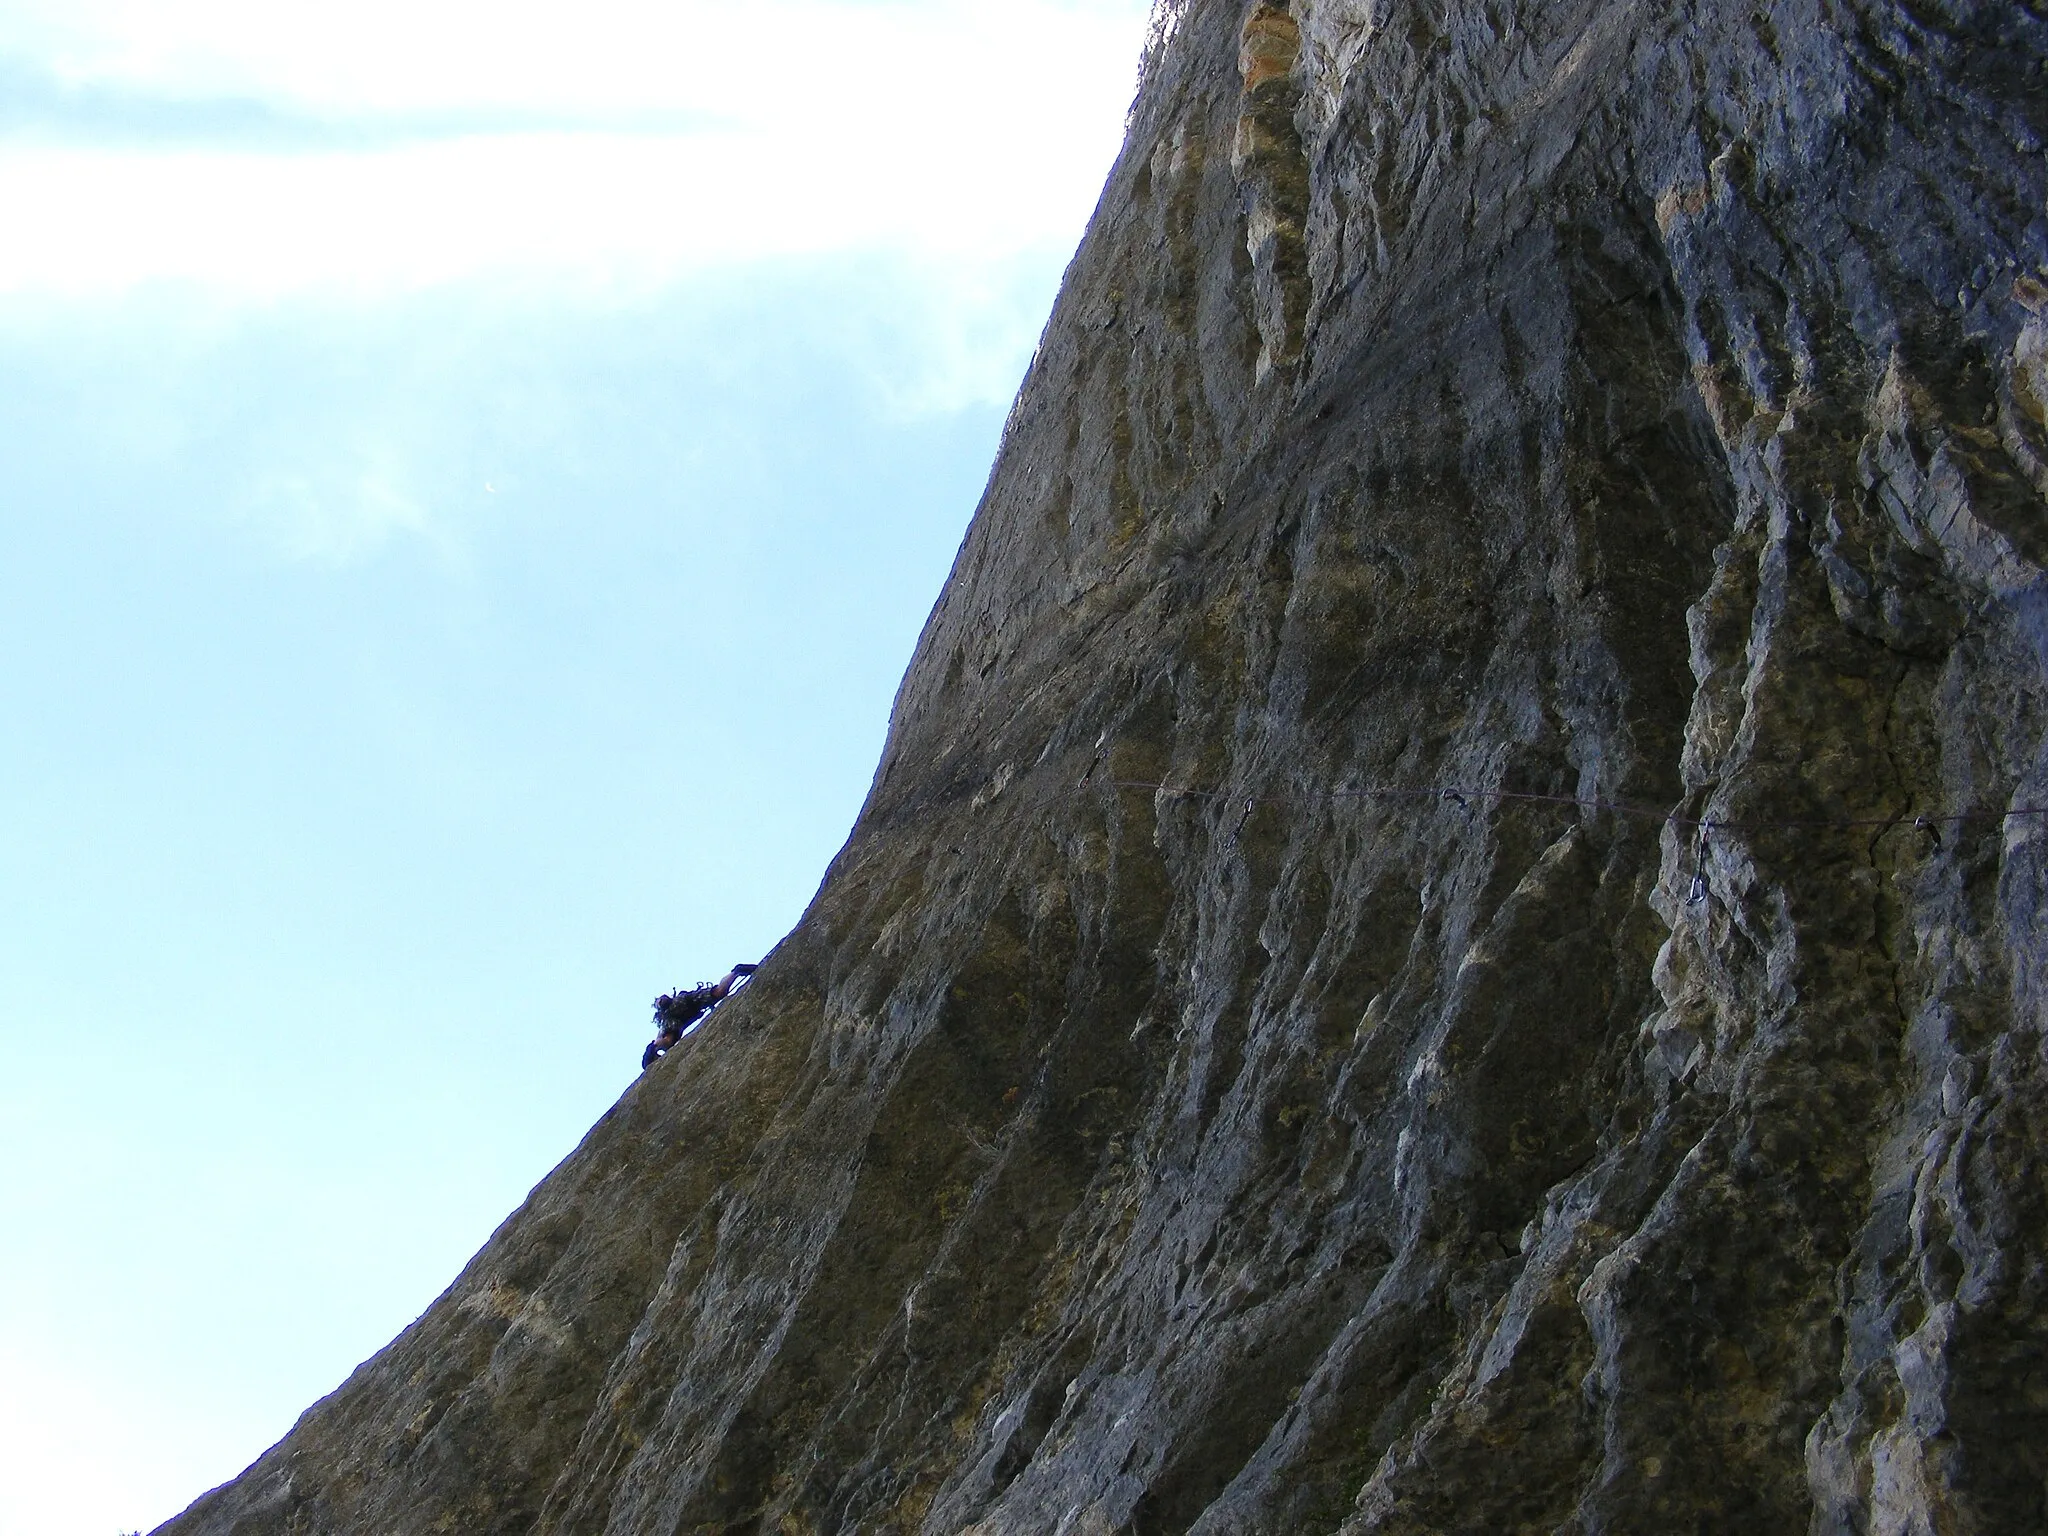 Photo showing: Climber on a route near the village of Orpierre, France